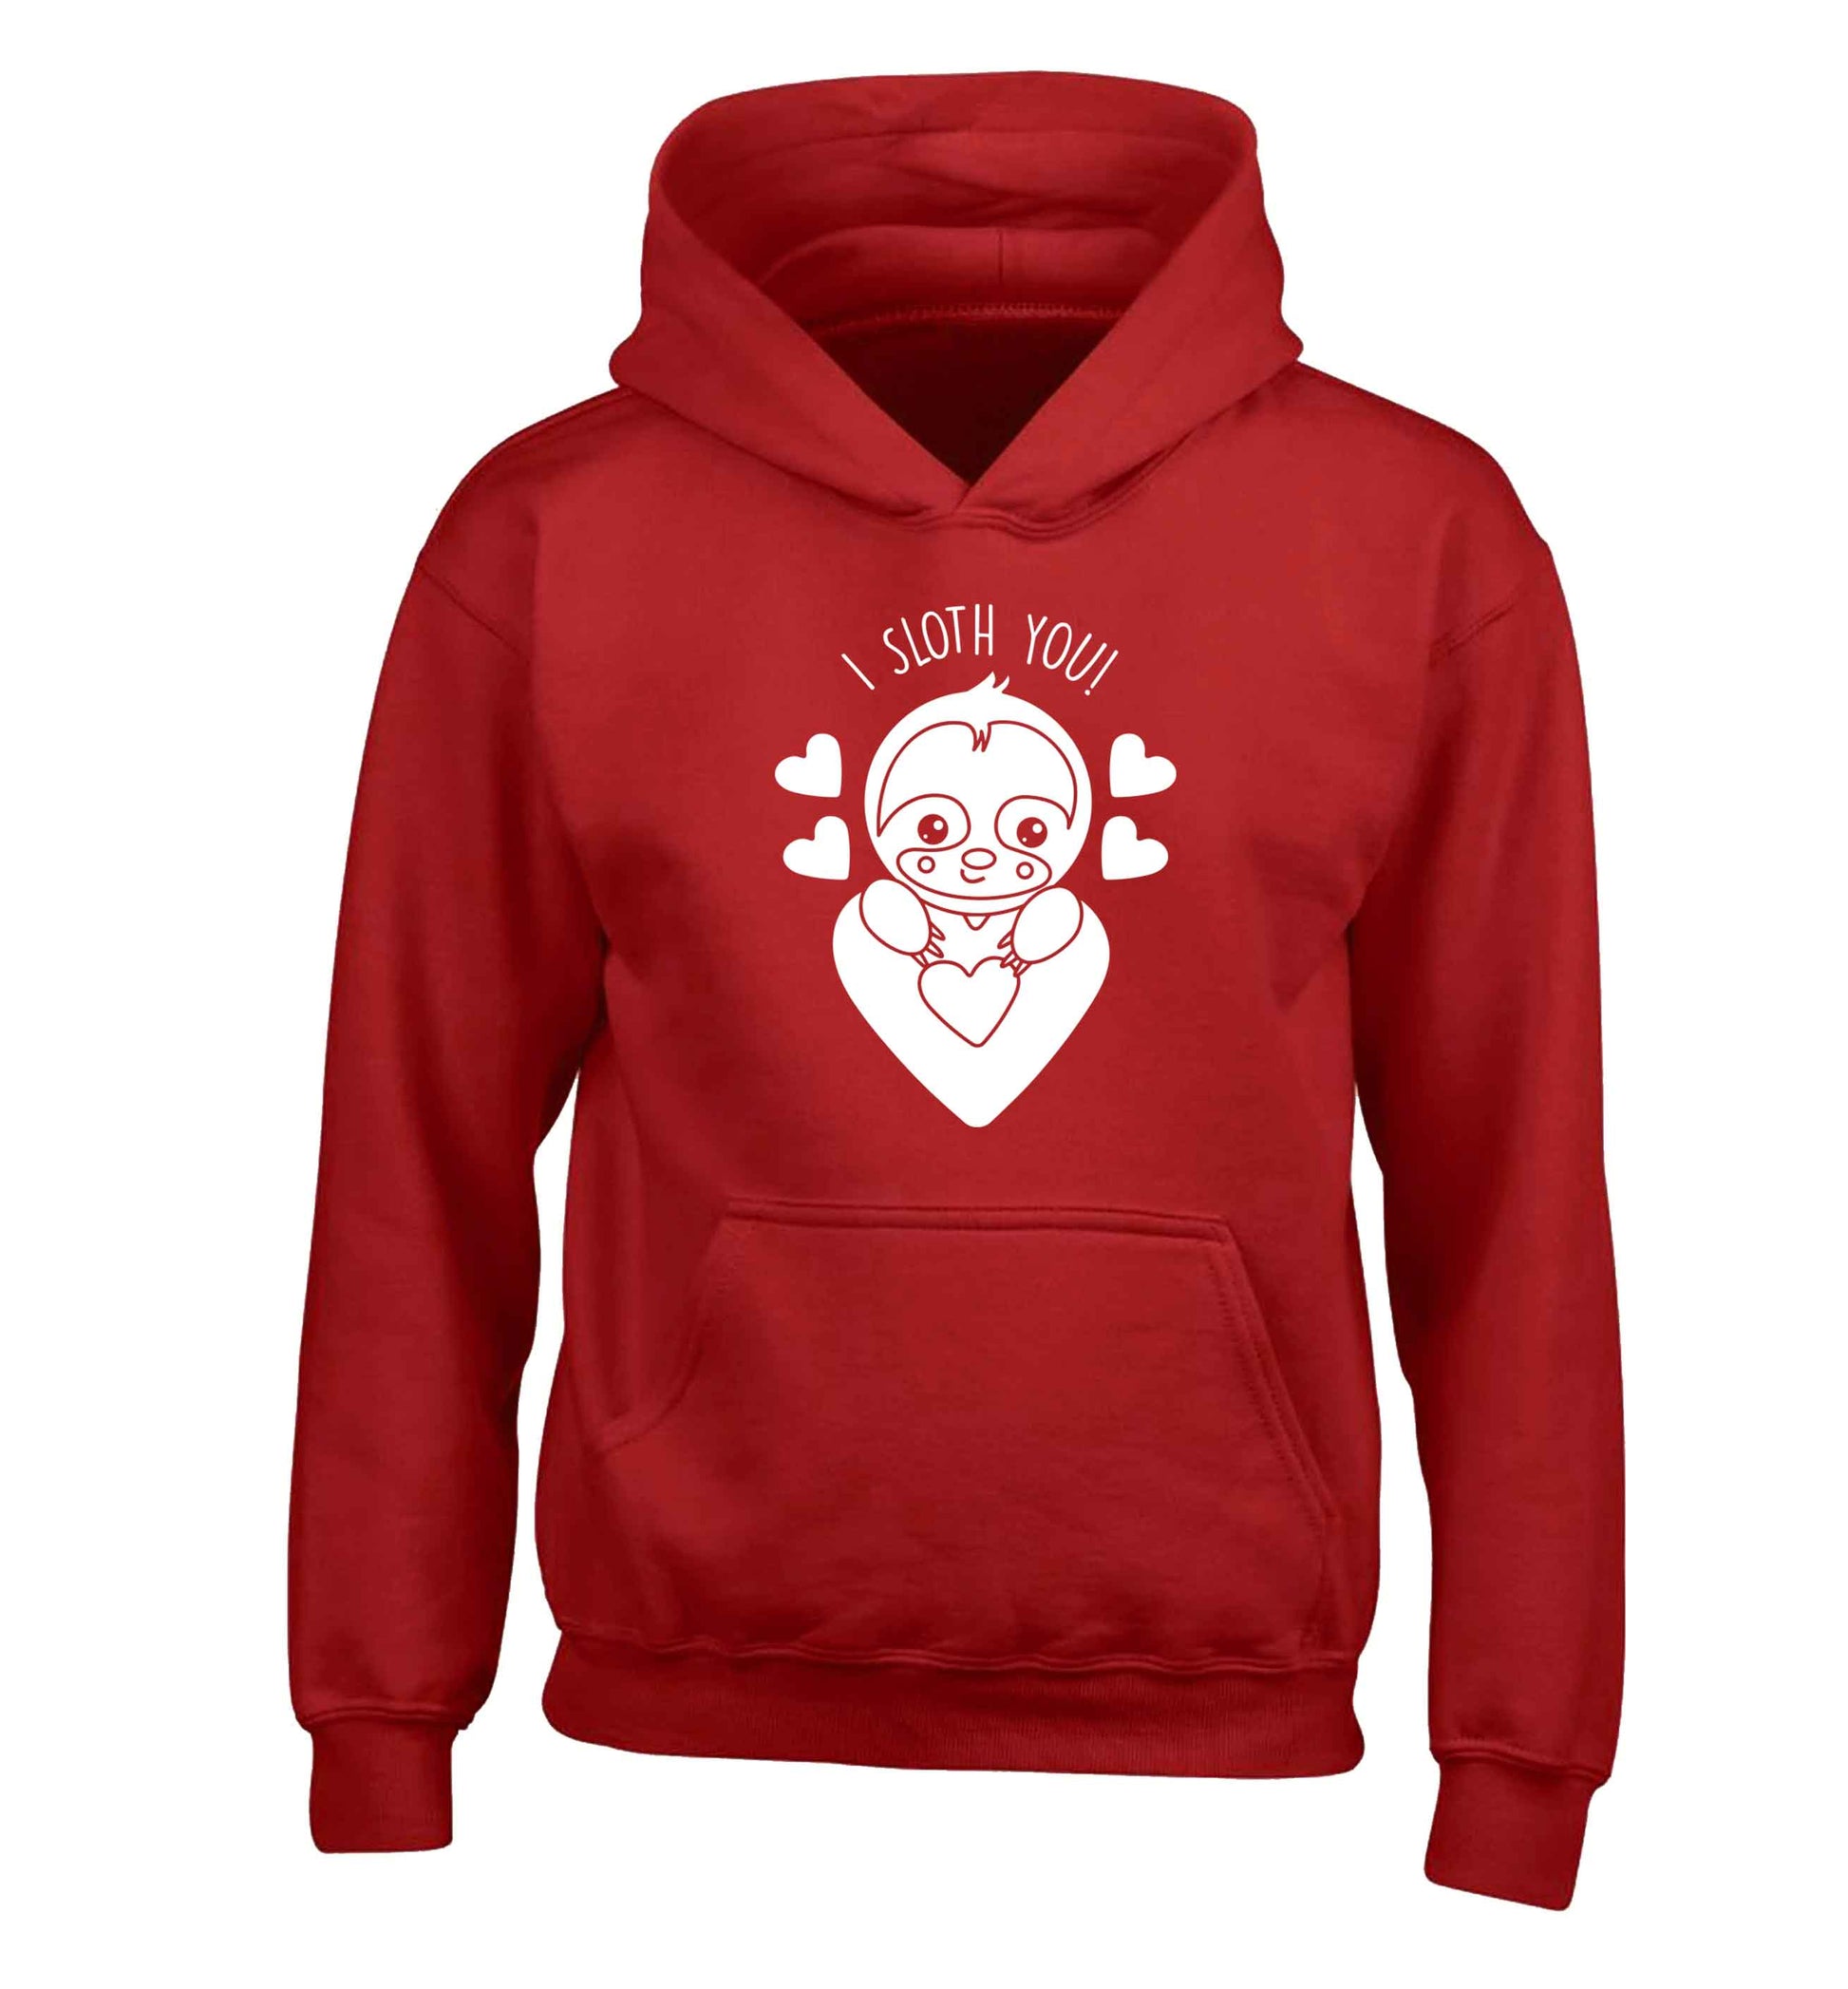 I sloth you children's red hoodie 12-13 Years